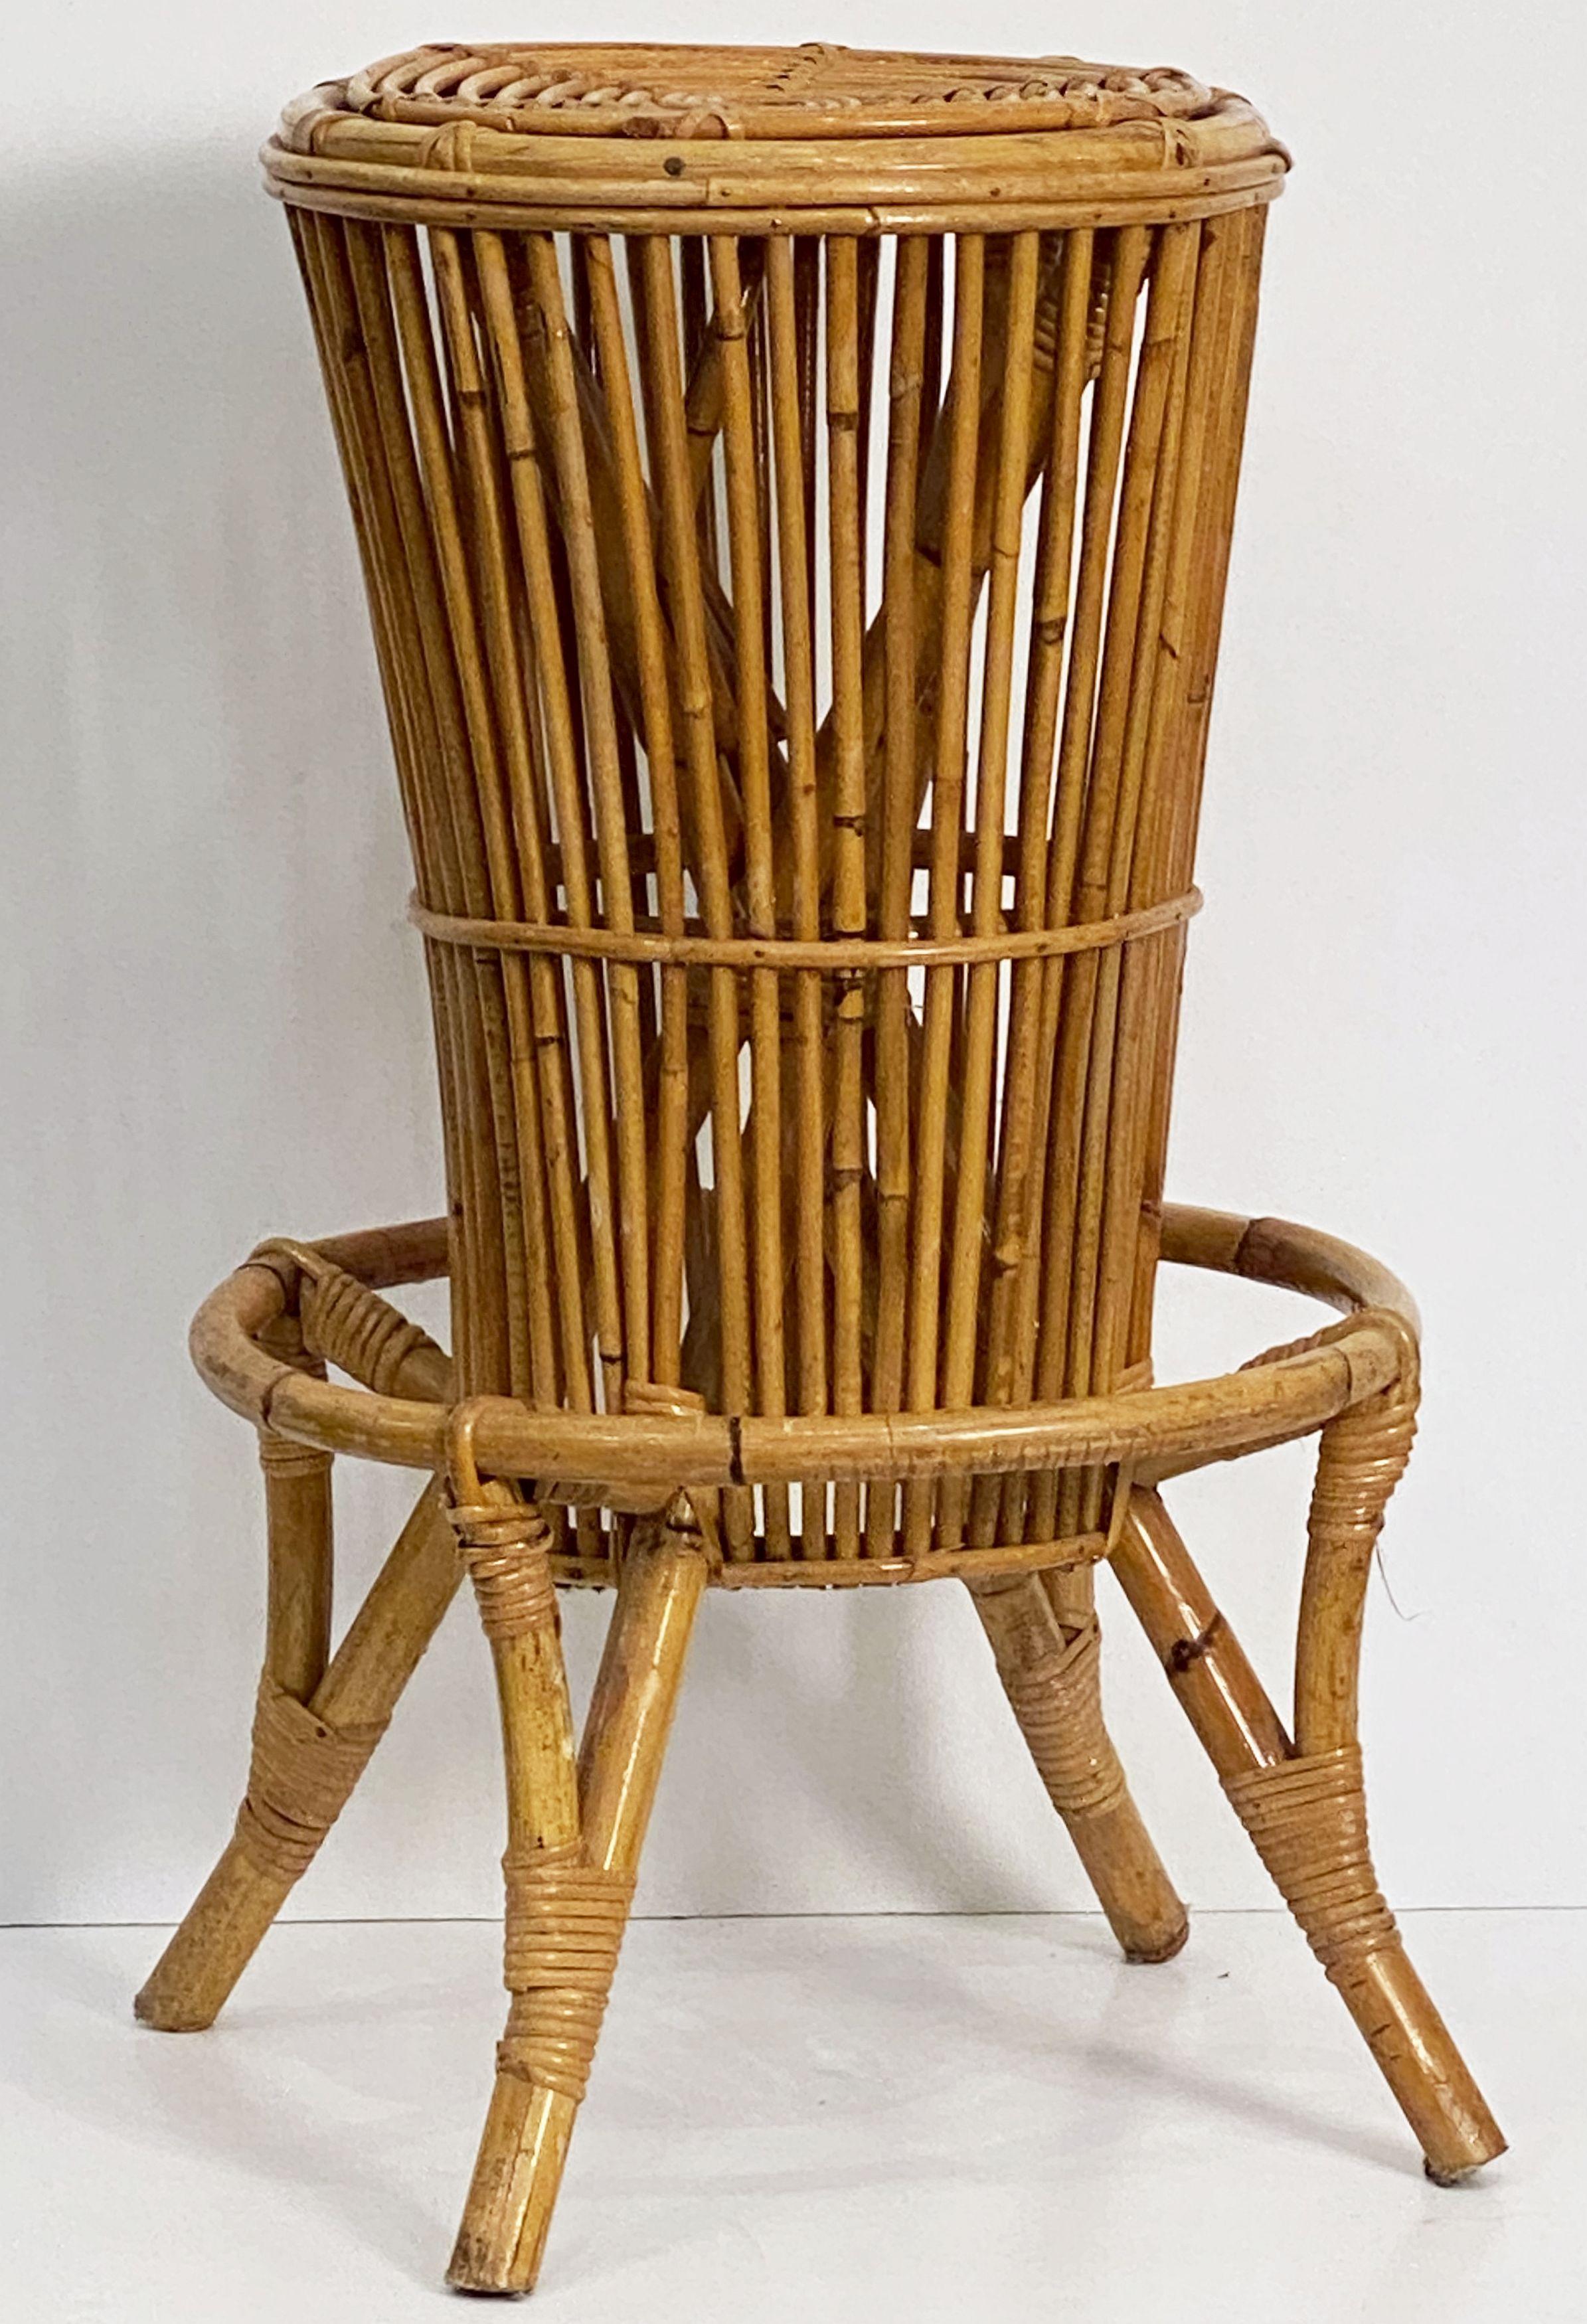 Italian Stool of Rattan and Bamboo from the Mid-20th Century For Sale 1